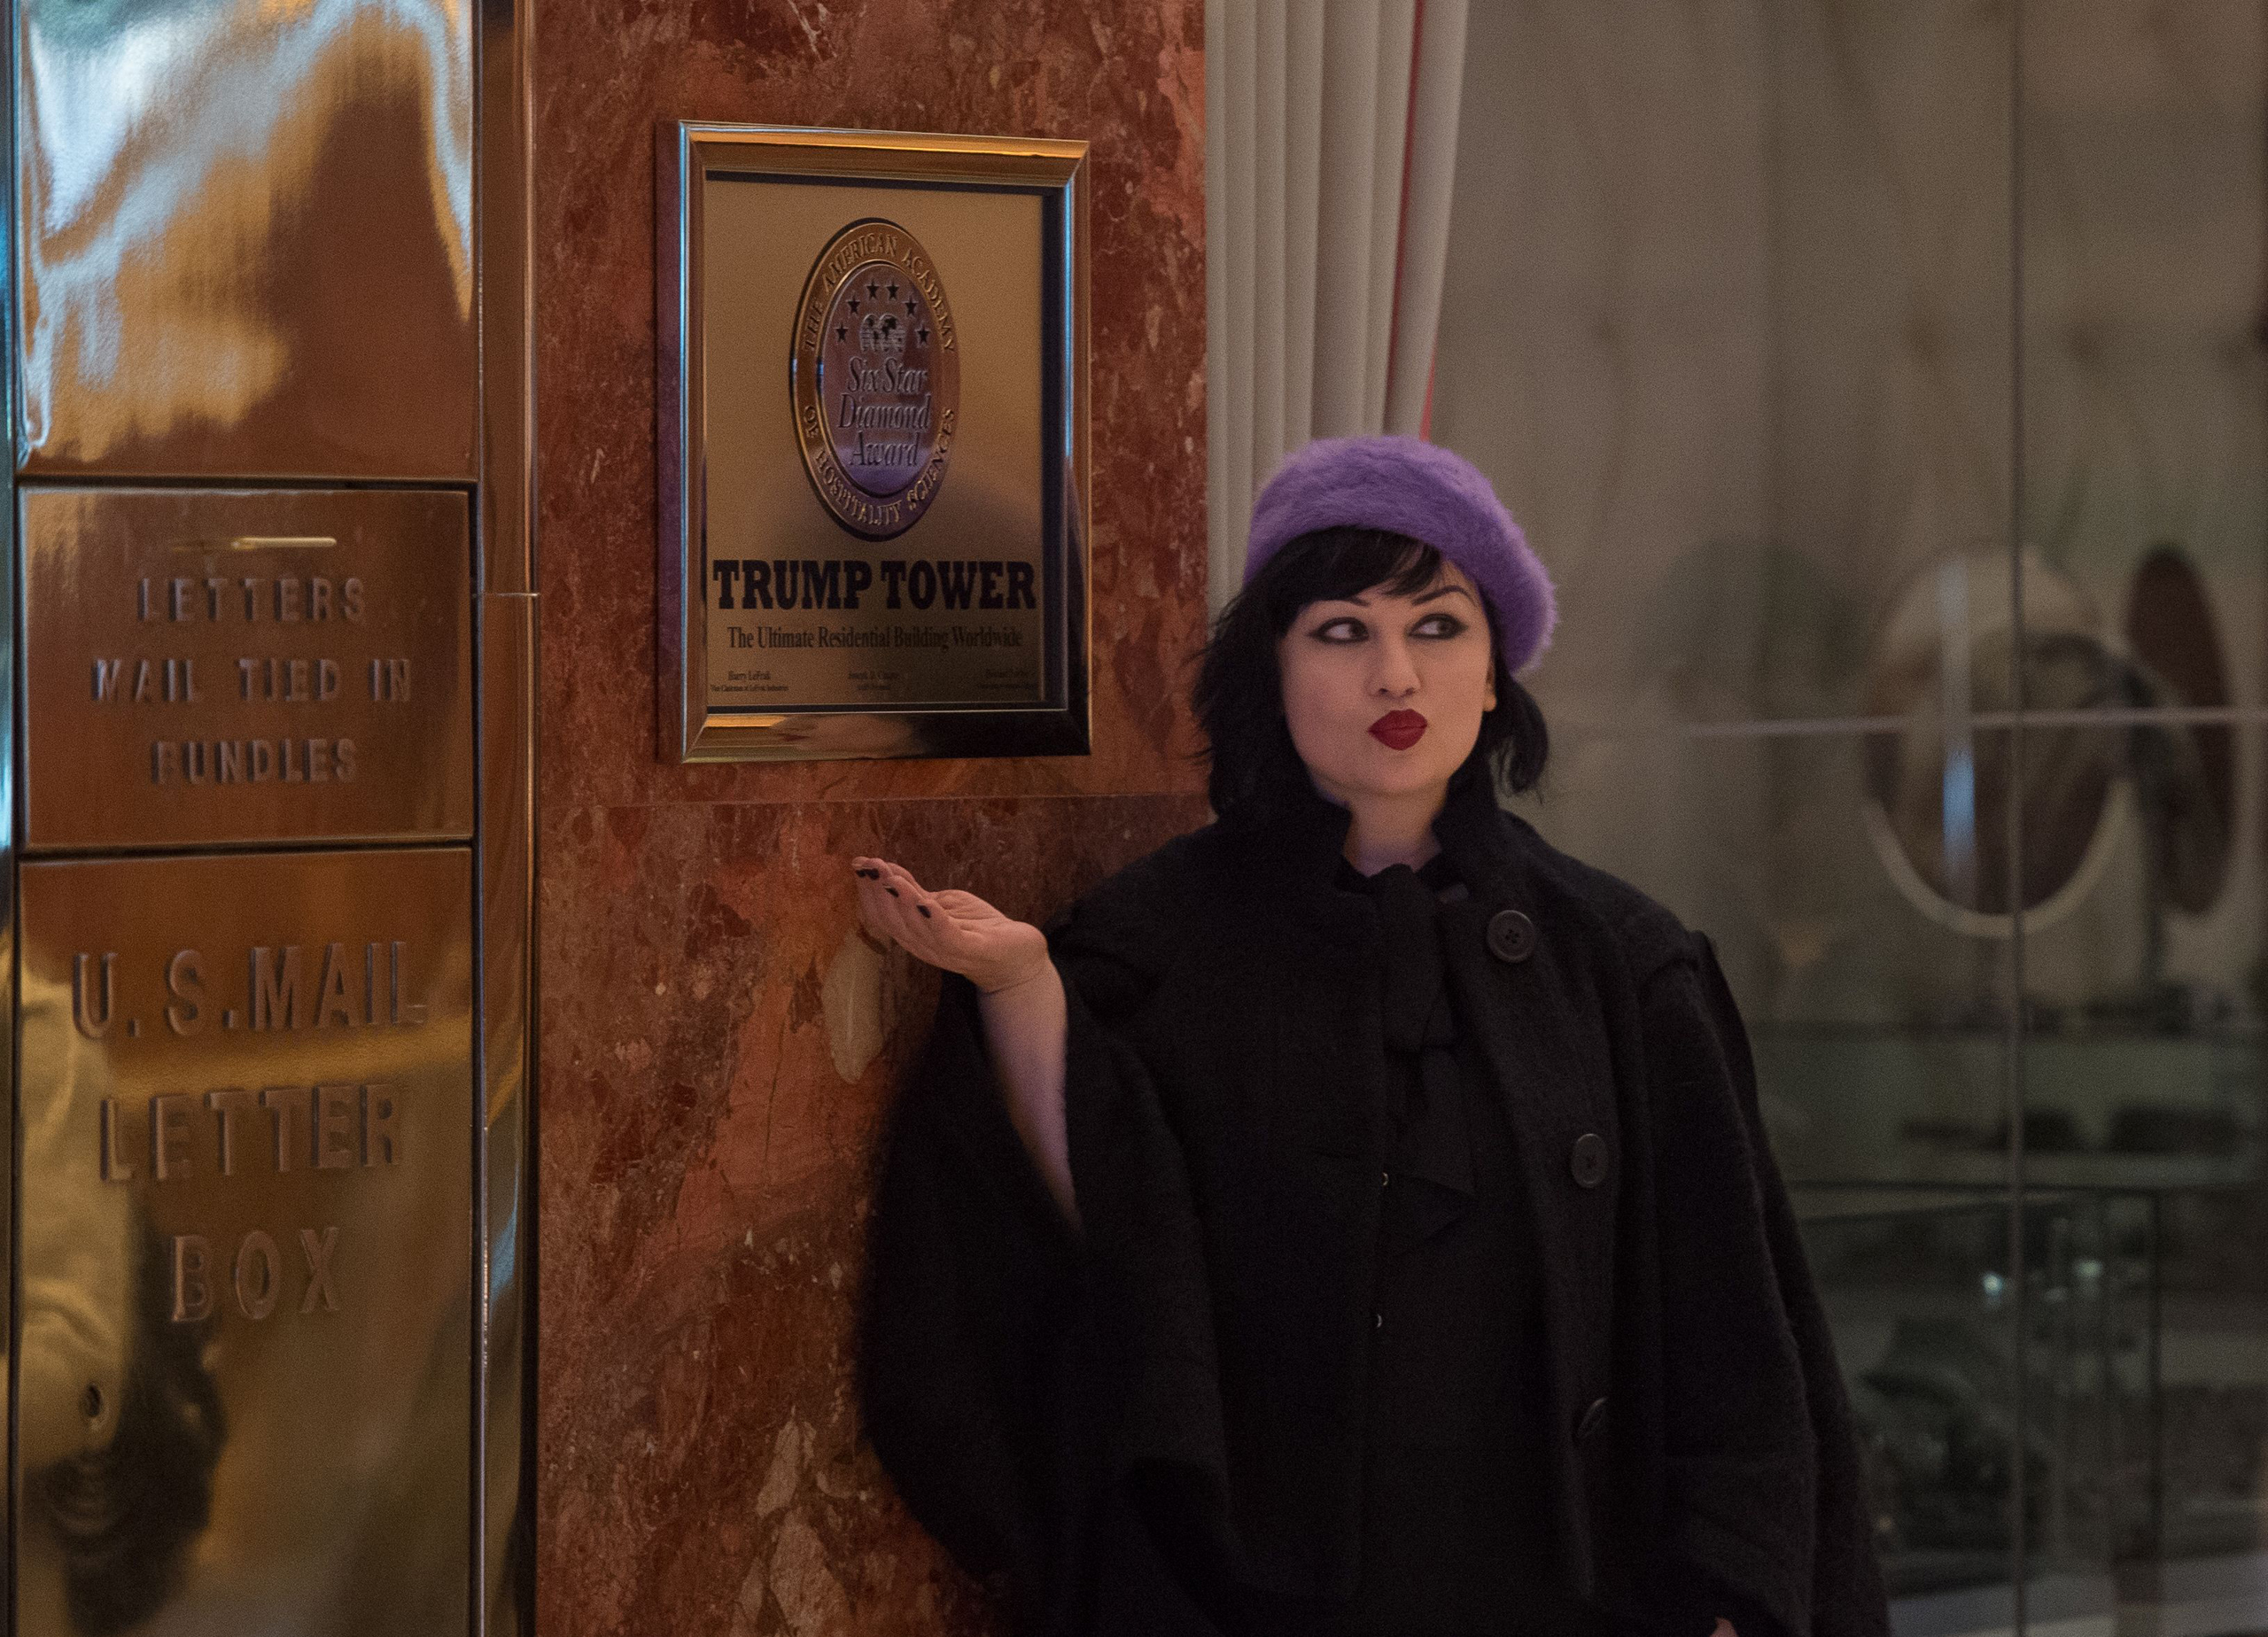 A woman poses near a sign at Trump Tower on Nov. 13, 2016.